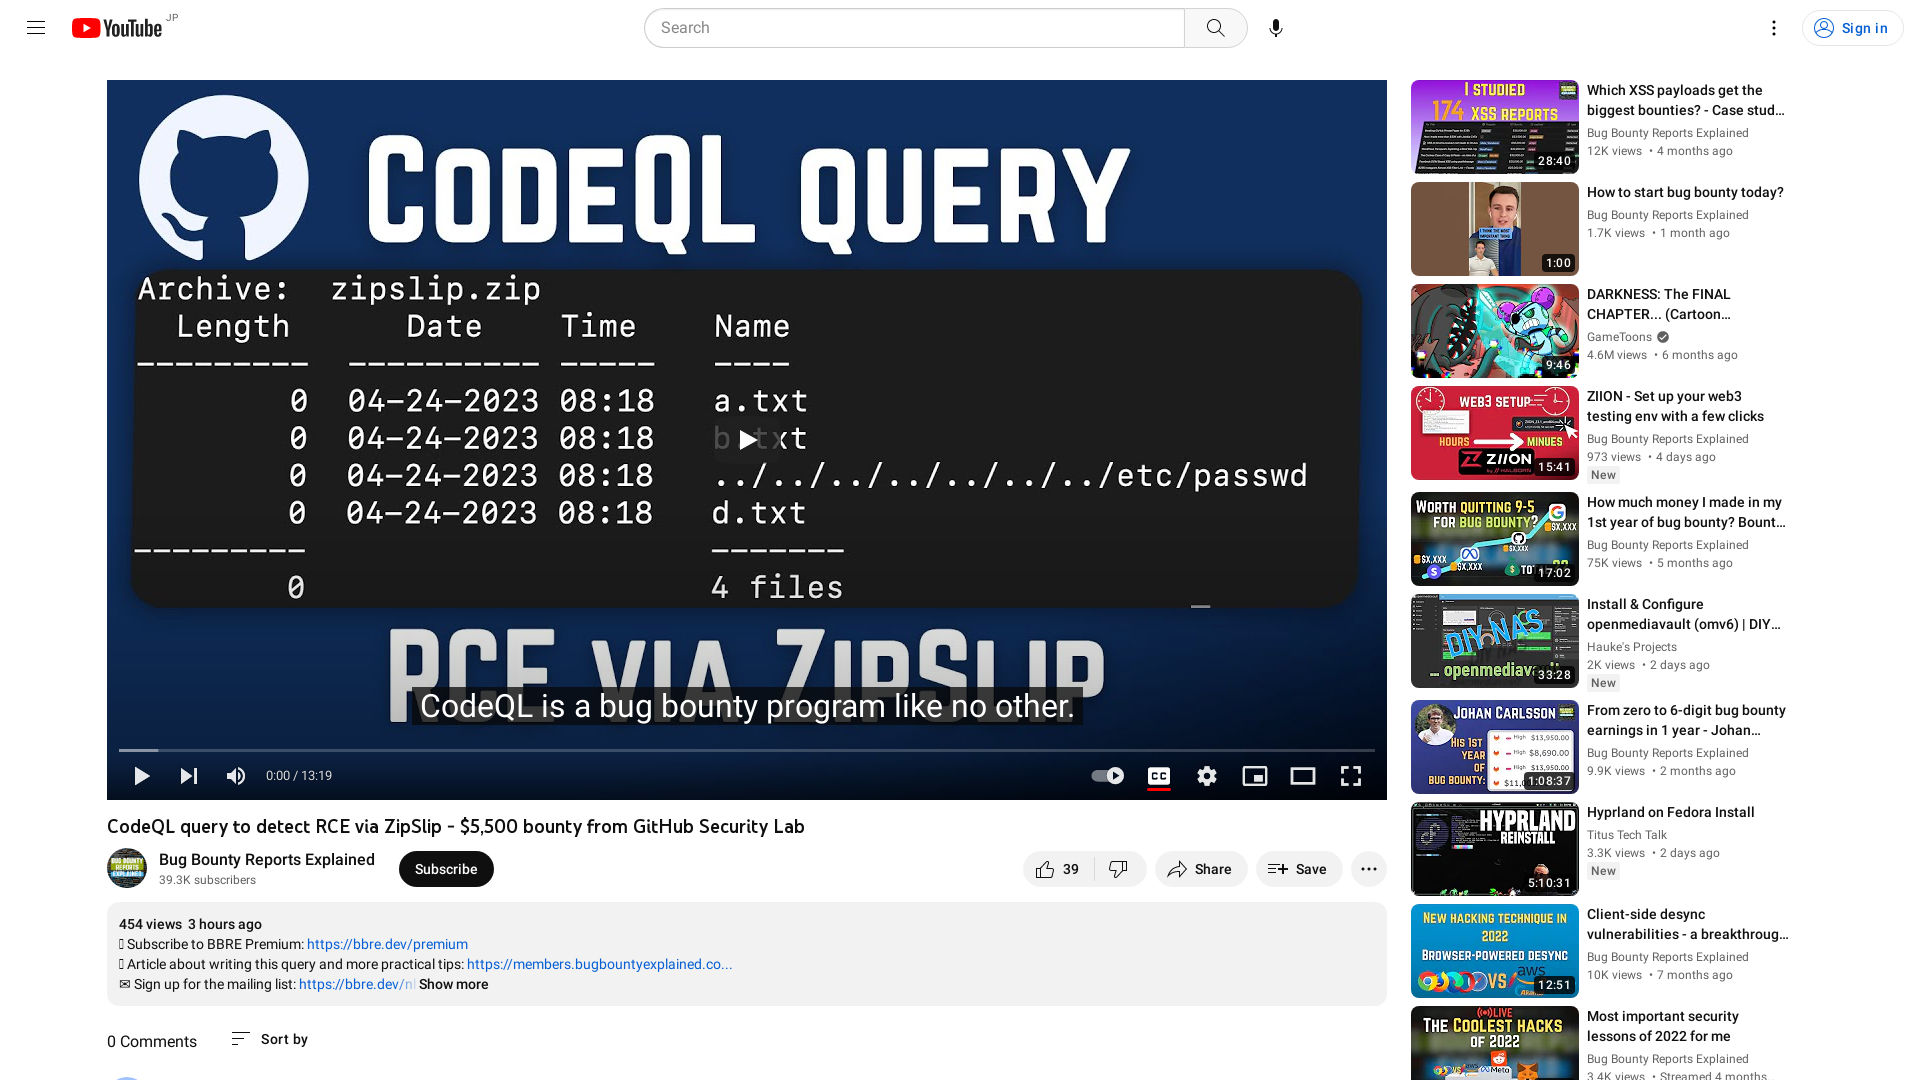 CodeQL query to detect RCE via ZipSlip - $5,500 bounty from GitHub Security Lab - YouTube